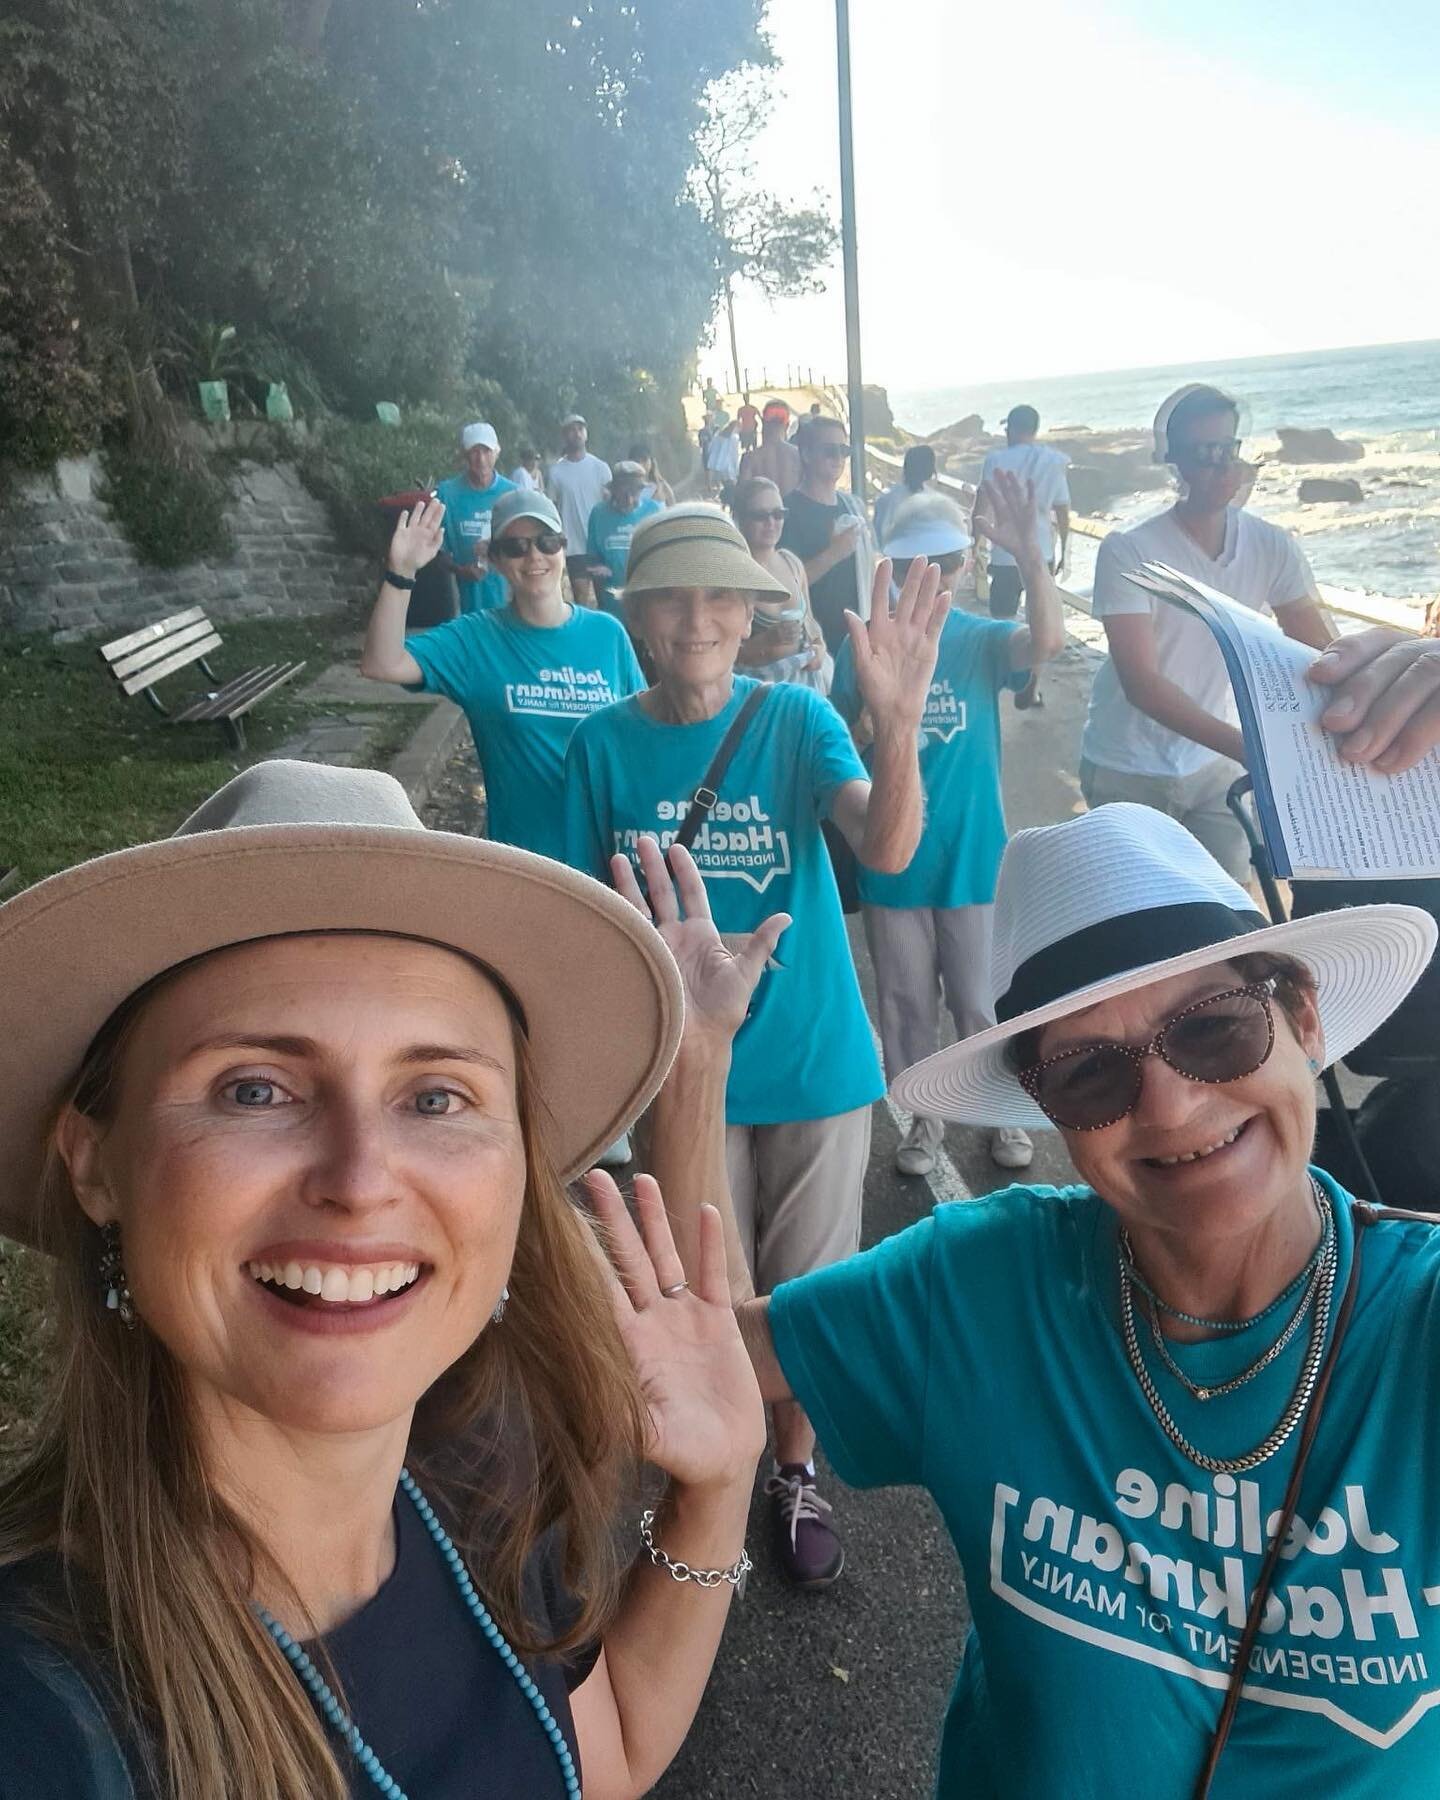 3 times a week in Manly, we start the day with a democracy walk in 3 different locations. Today Manly and Curl Curl put on another beautiful nature show. 

6 more days till election day - Sat March 25th!

Vote 1 Joeline Hackman - and remember to numb